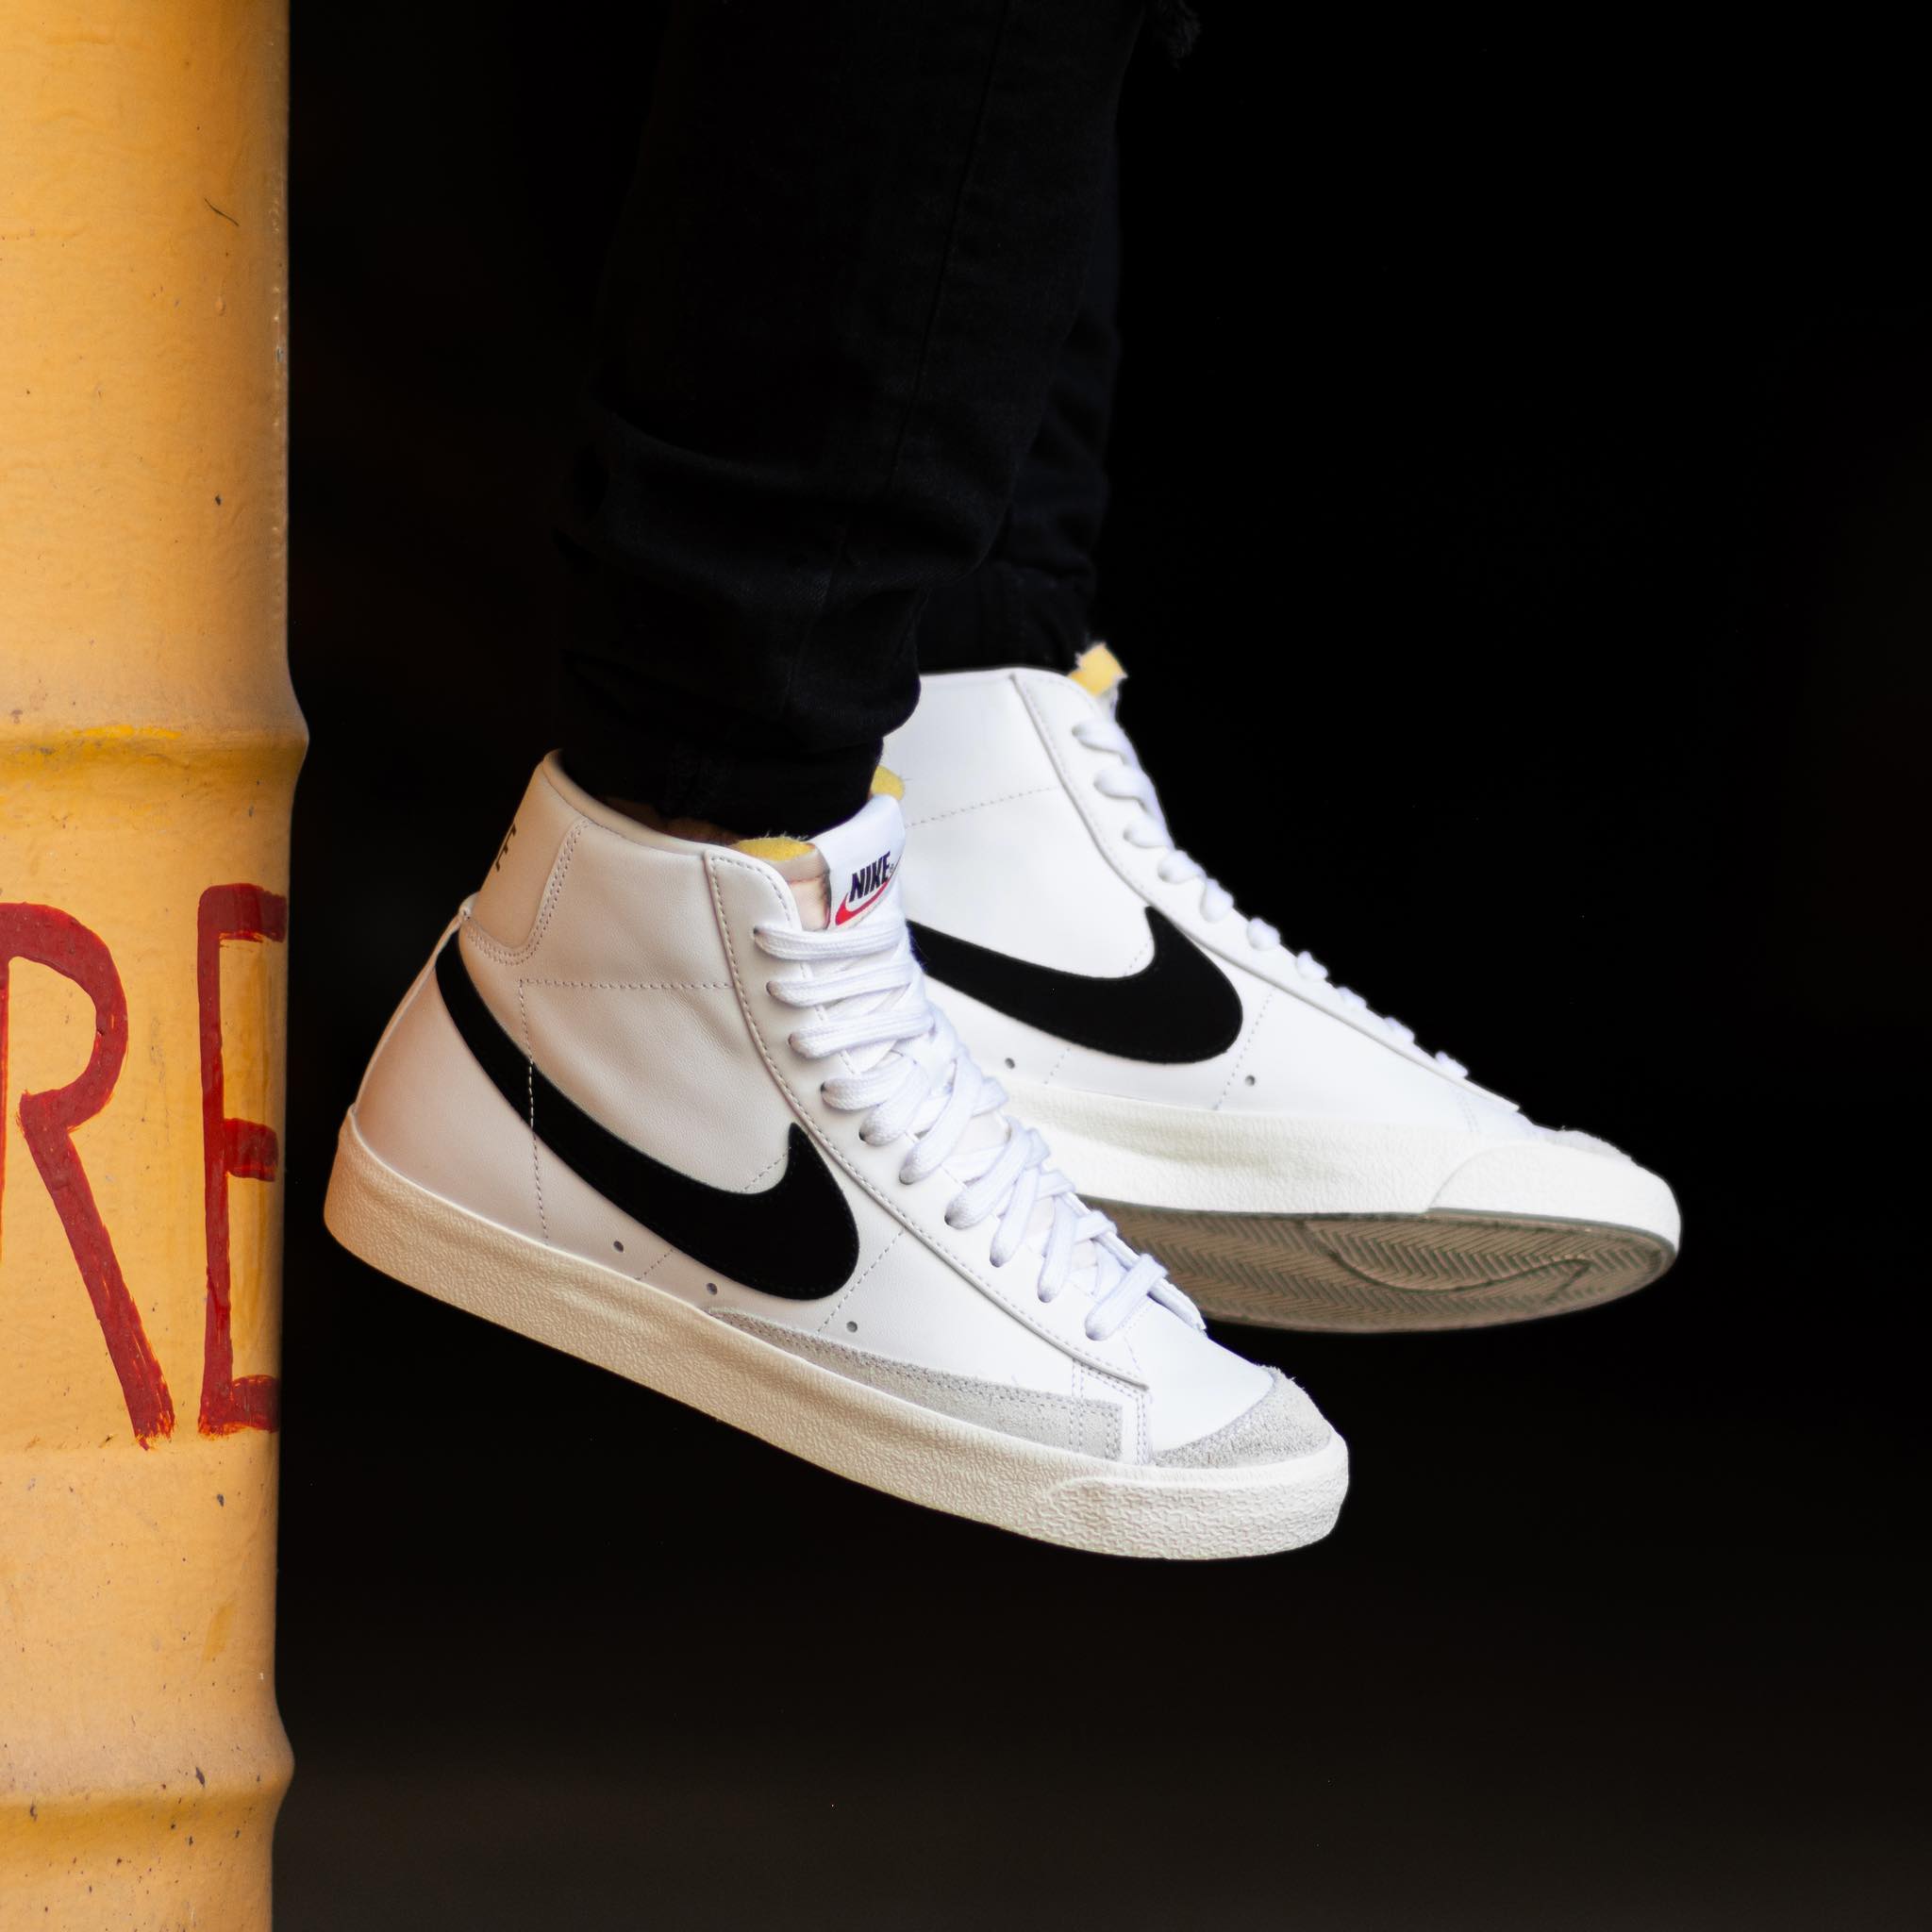 Nike Blazer Mid '77 Vintage Review  Better Than Converse for Working Out?